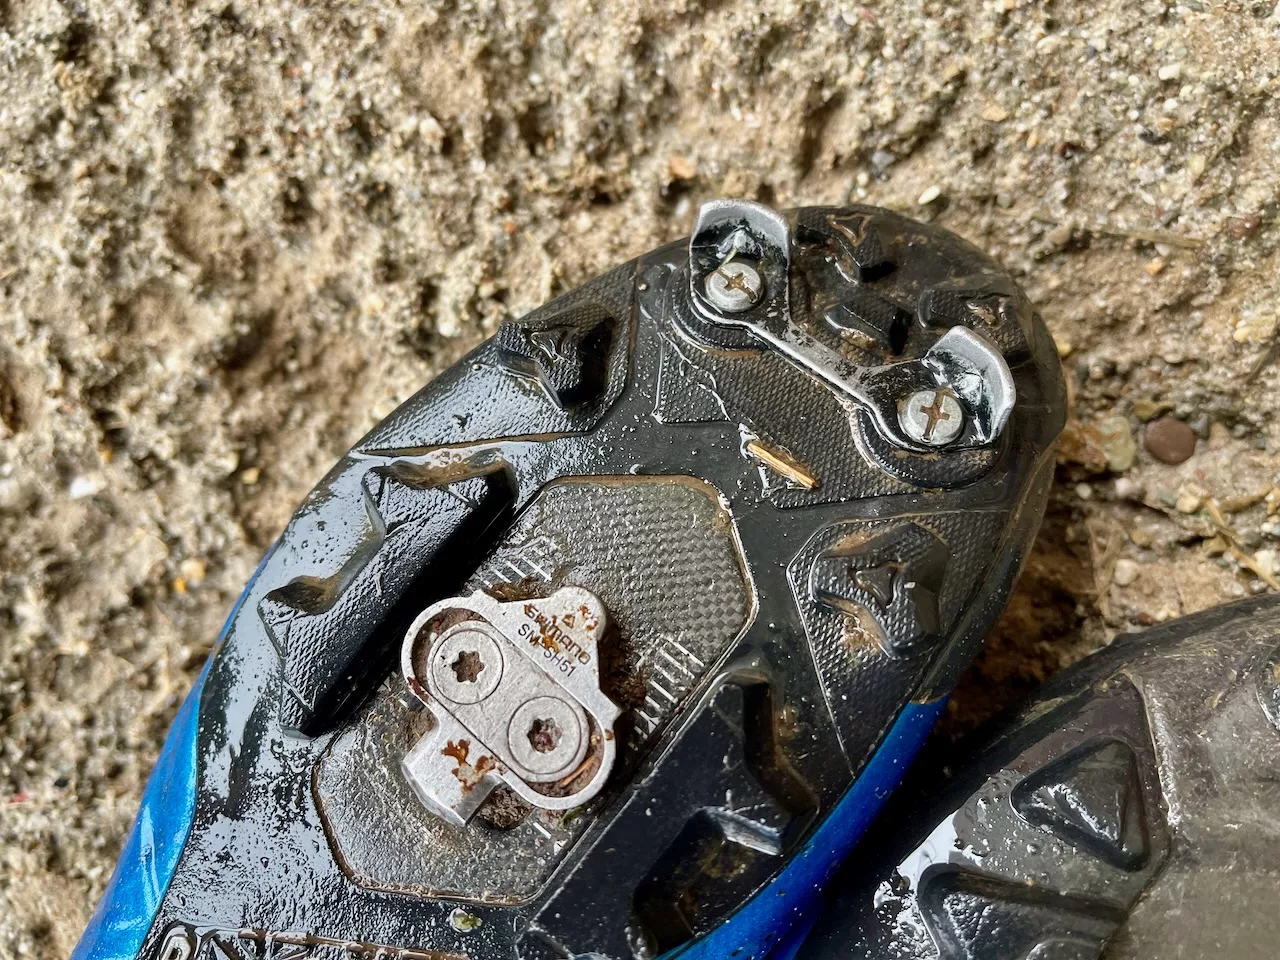 Shimano xc902 toes spikes